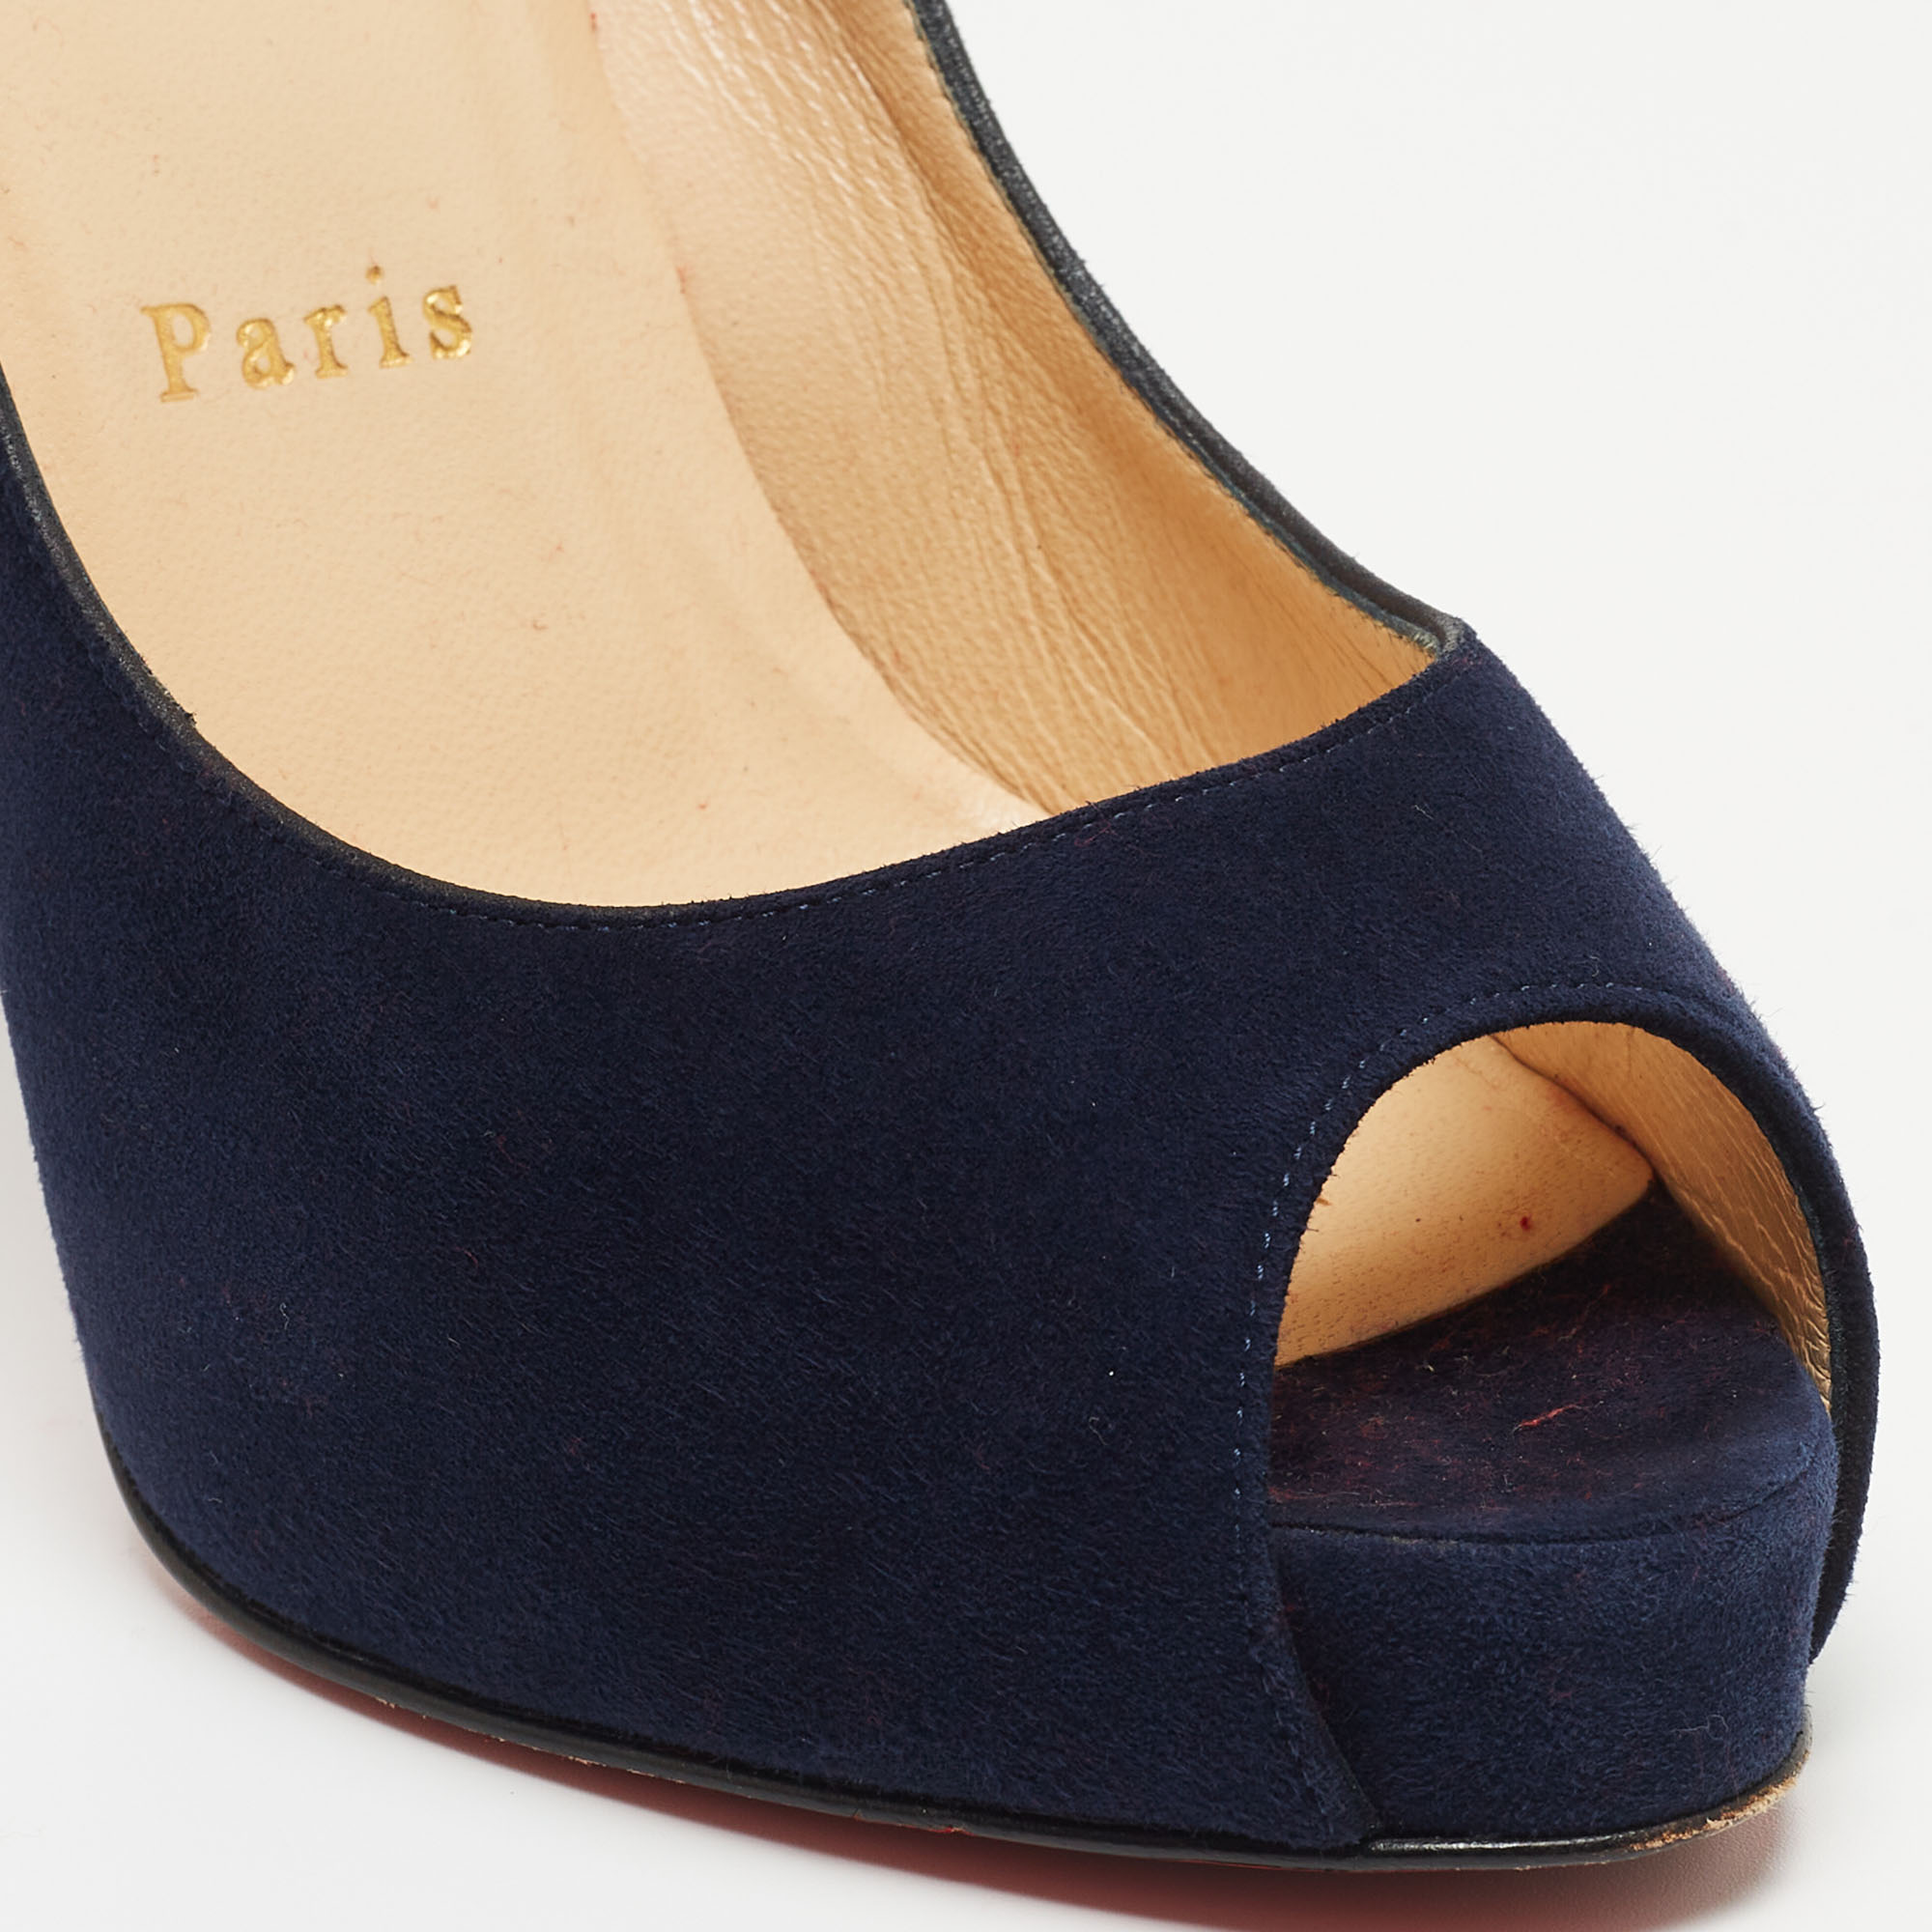 Christian Louboutin Navy Blue Suede New Very Prive Pumps Size 37